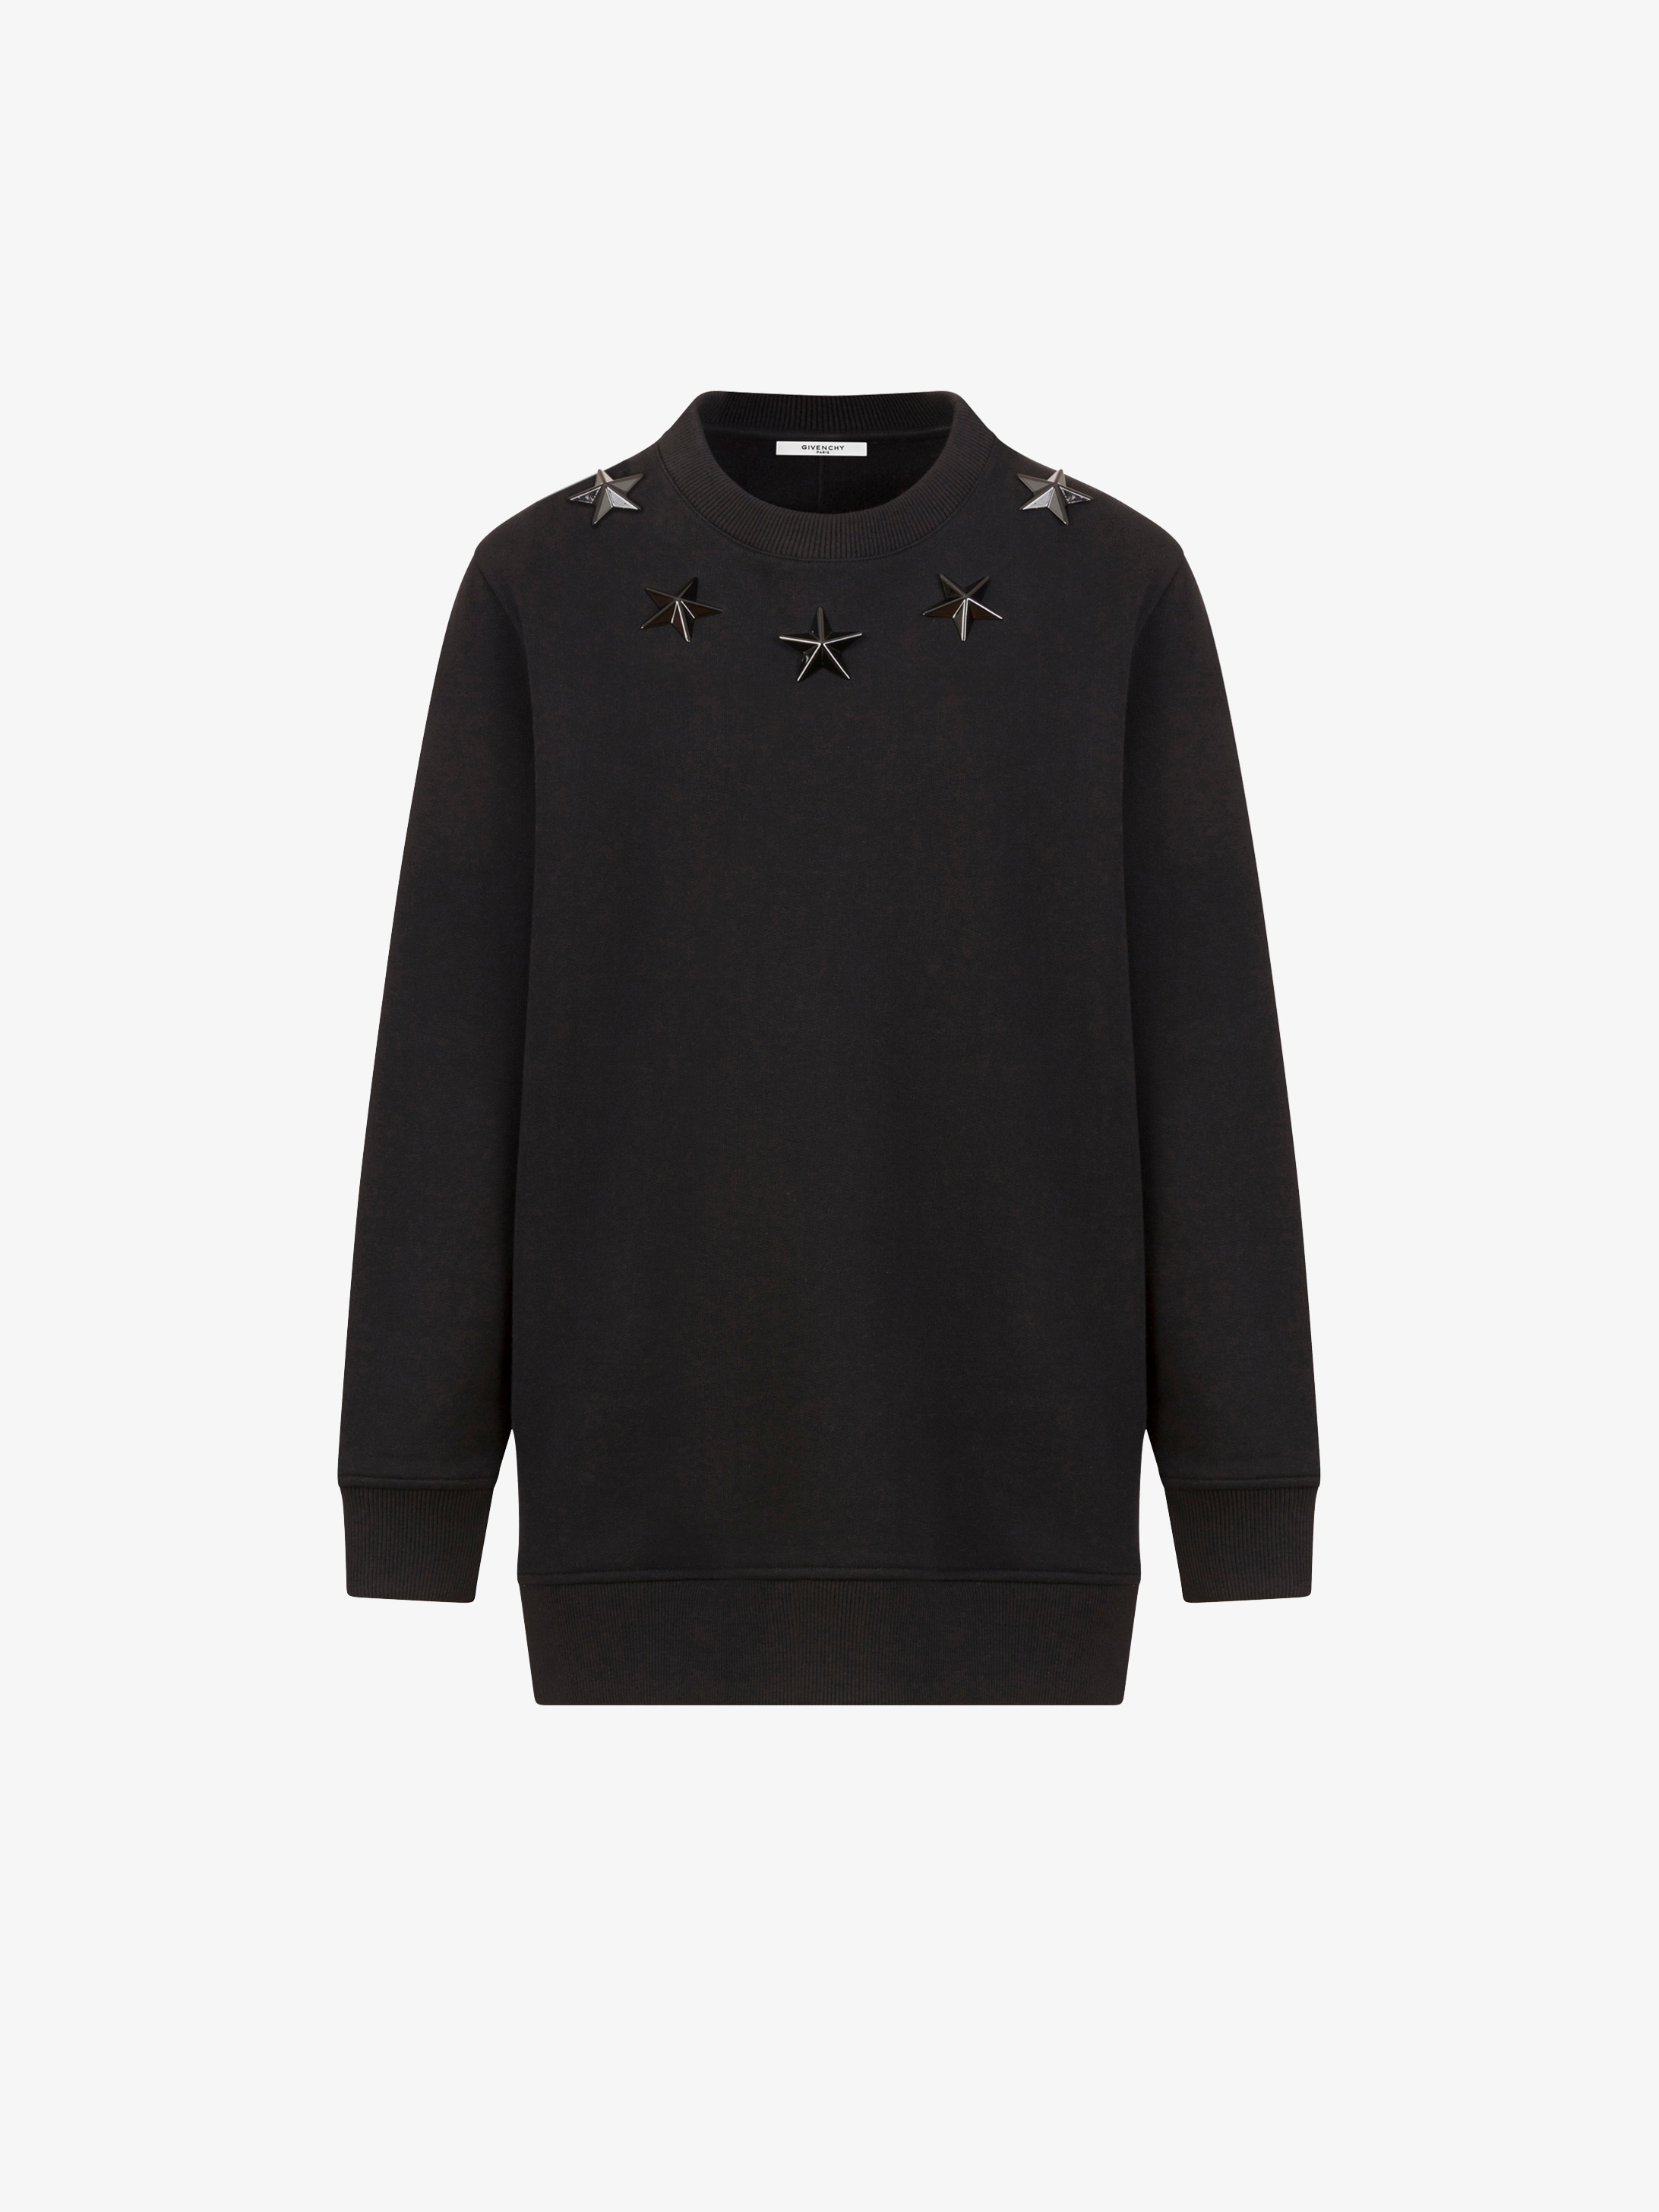 Givenchy Stars embroidered Sweatshirt 